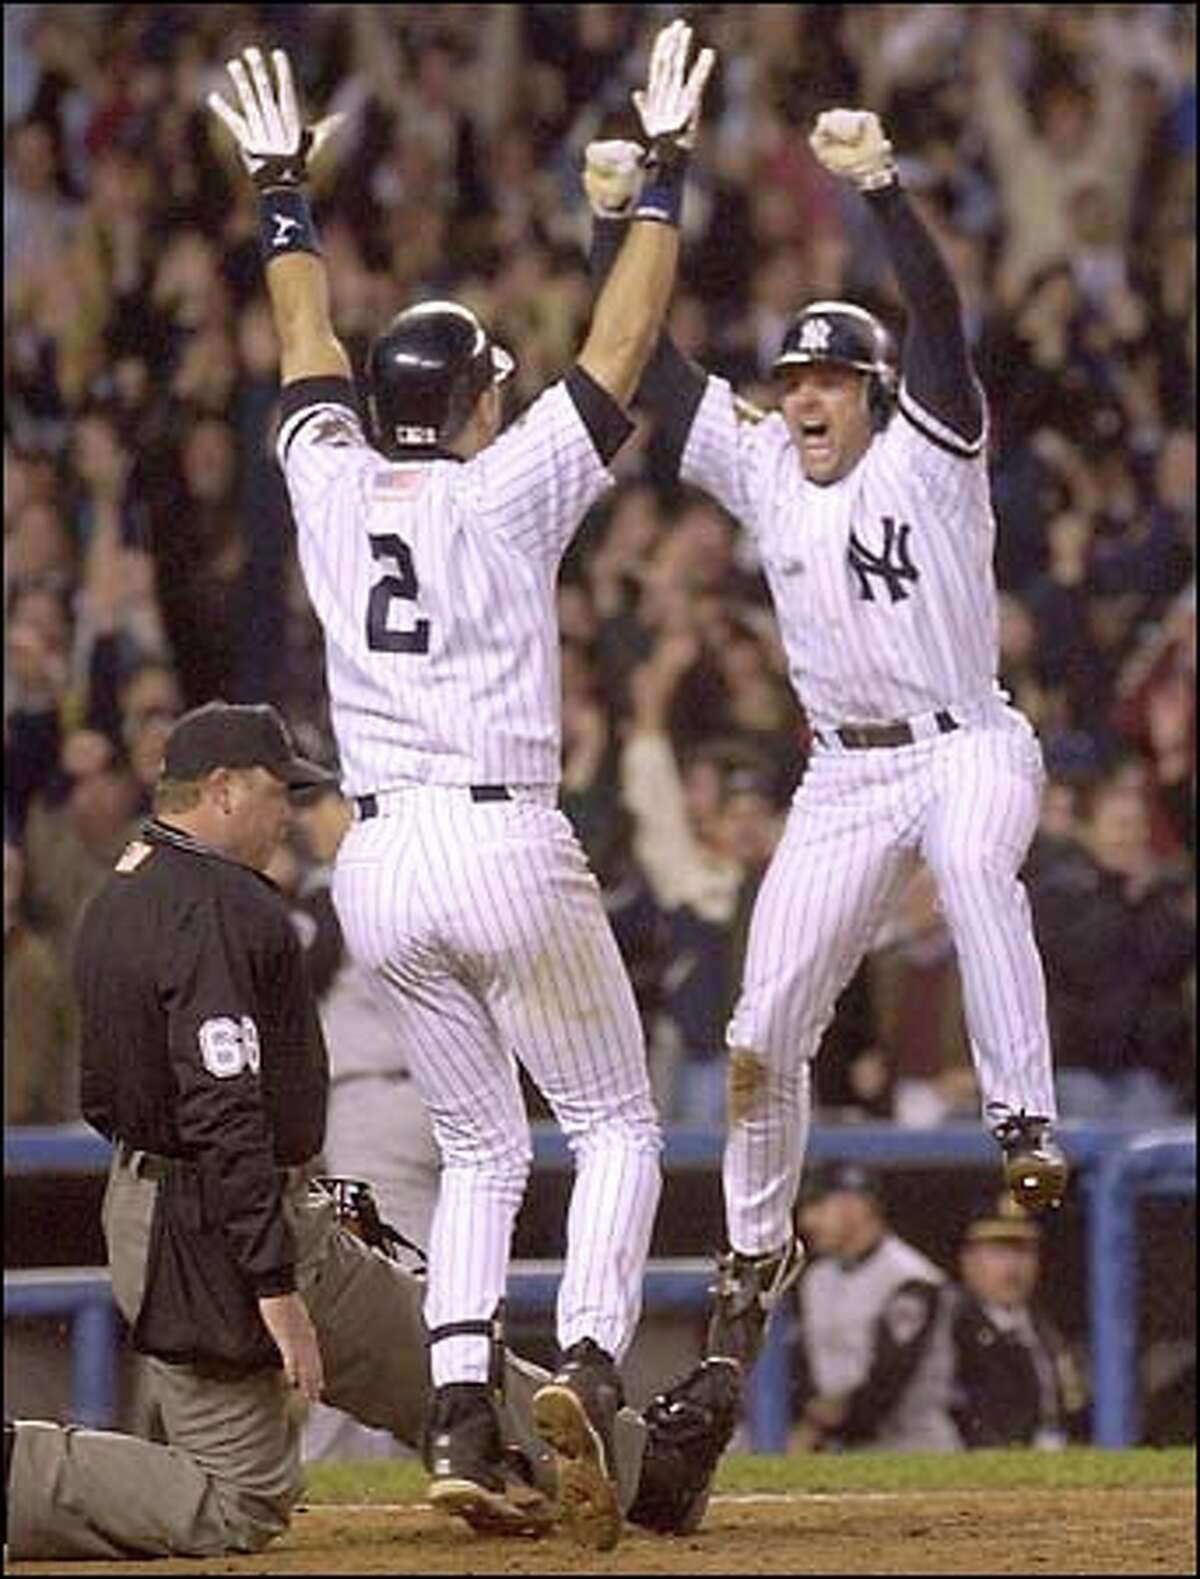 Chuck Knoblauch leaps into Derek Jeter's arms after scoring the winning run in the 12th inning of Game 5 of the World Series. The 3-2 victory gave the Yankees a 3-2 series lead. Game 6 is tomorrow.